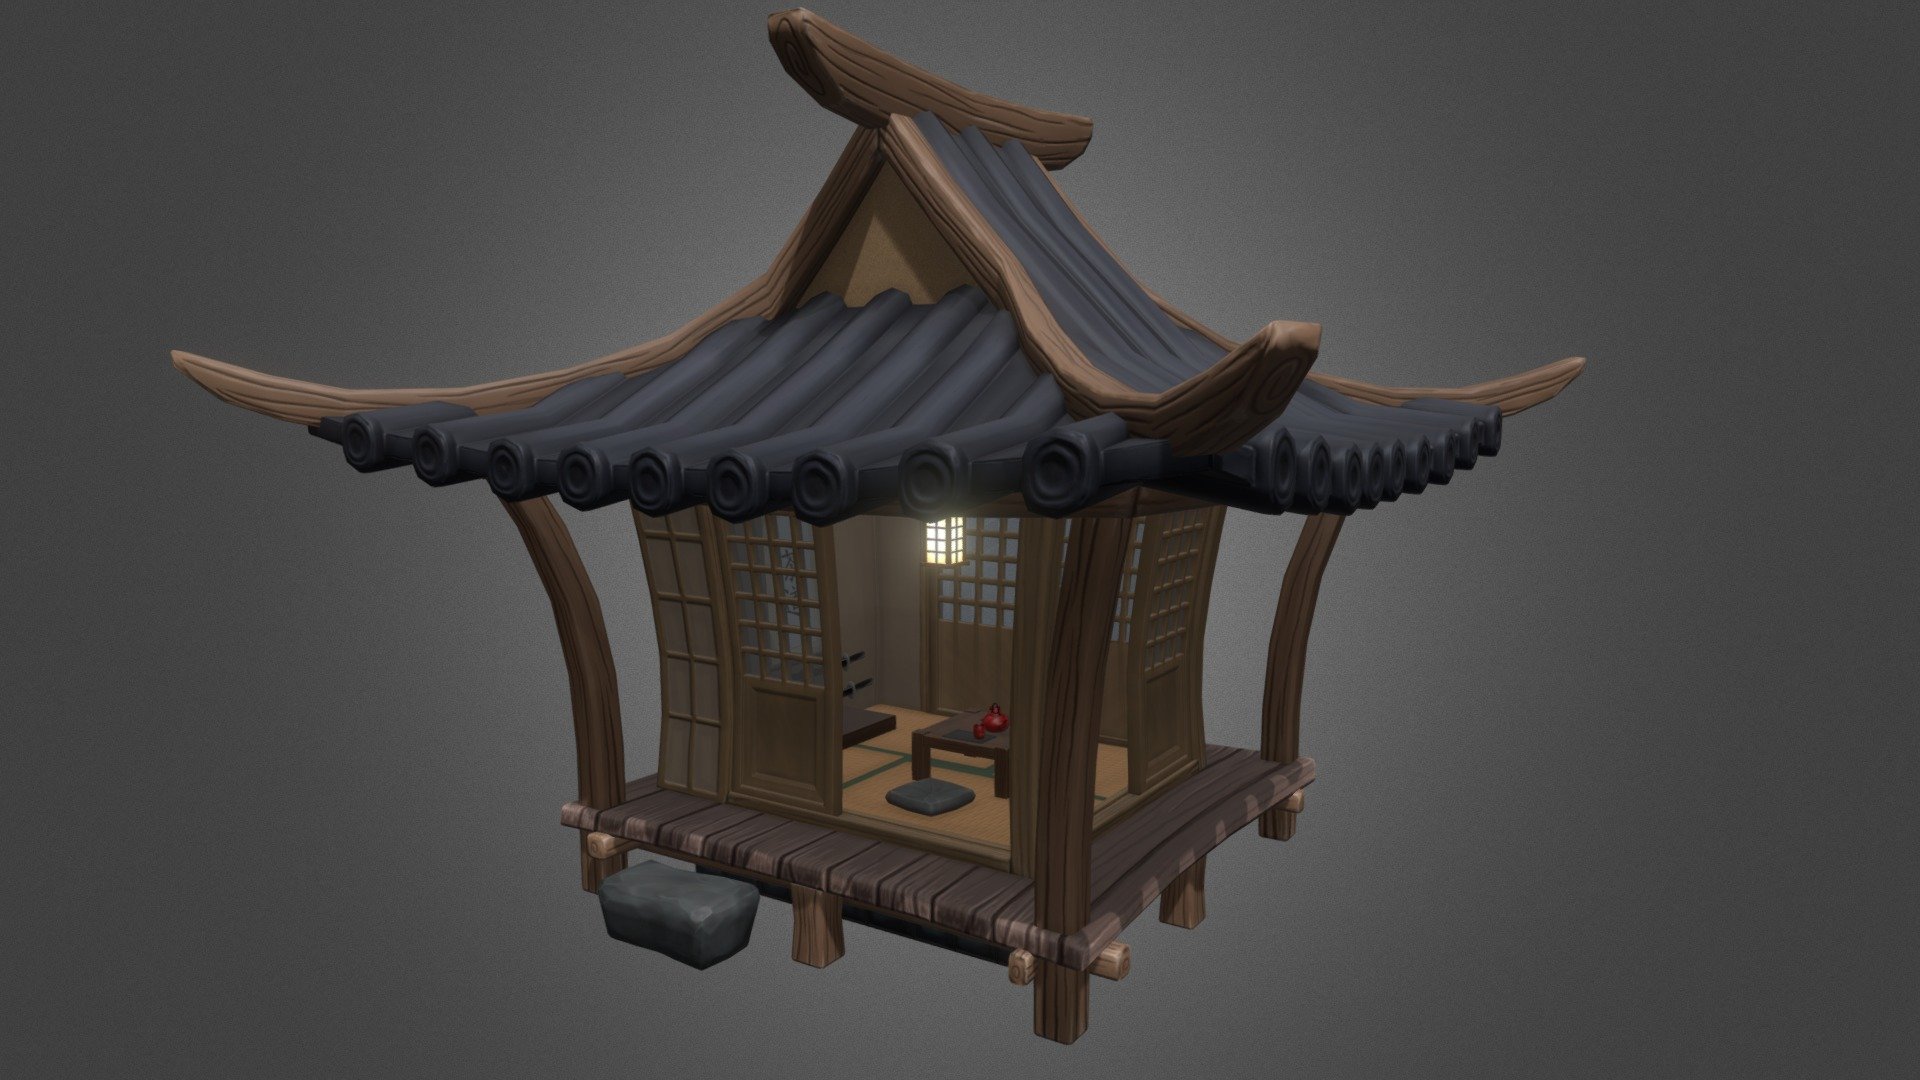 Continuing on with my Japanese theme, I created a tea house which will sit inside a nice garden at some point 3d model